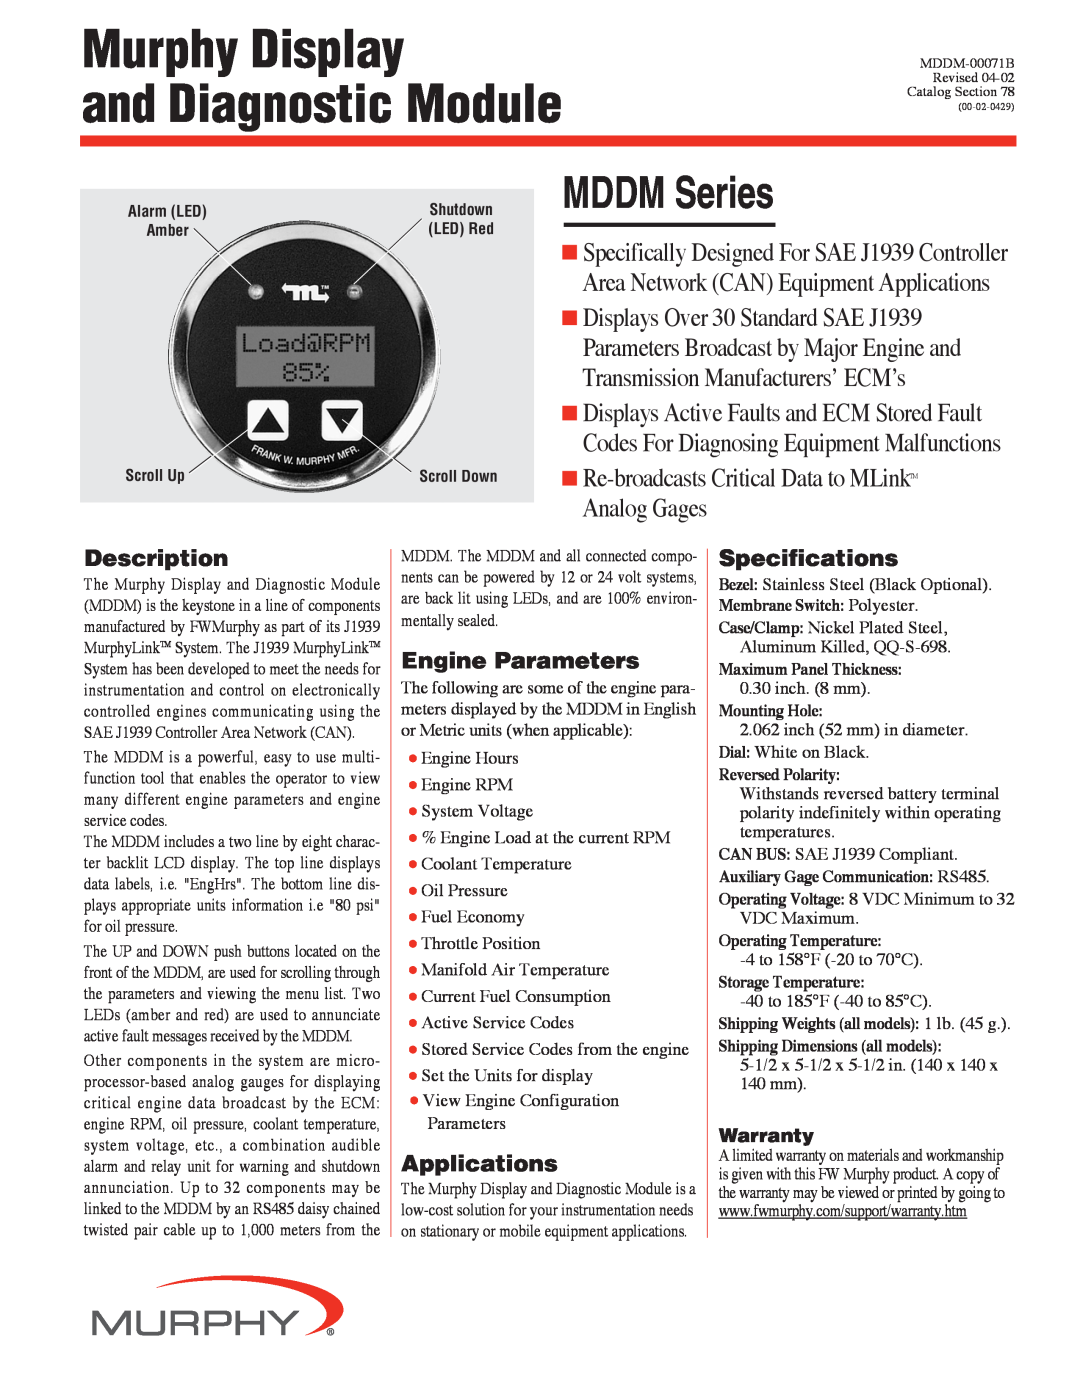 Murphy specifications Description, Engine Parameters, Applications, Specifications, MDDM Series 